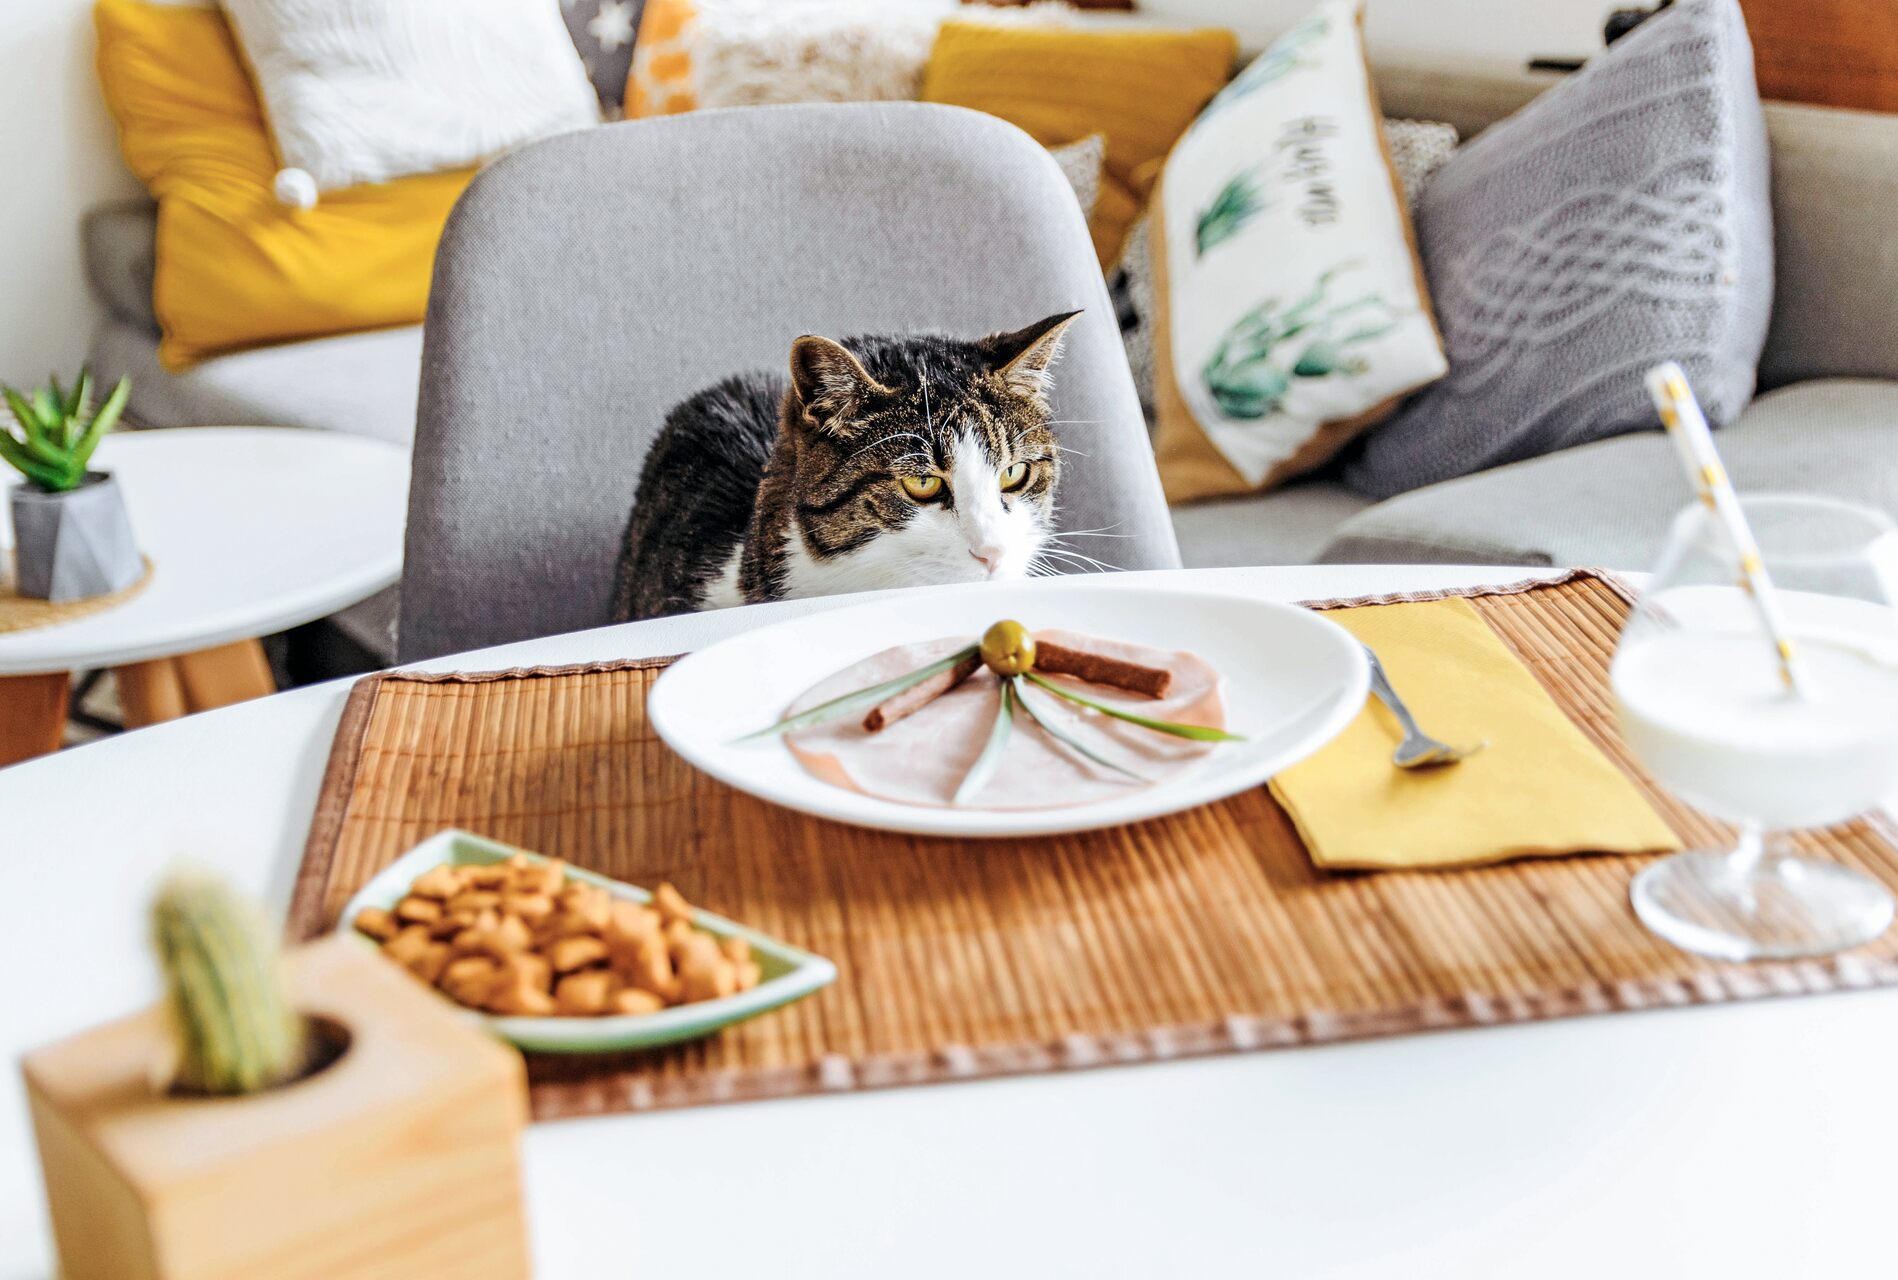 A cat sitting by a plate of food on a table